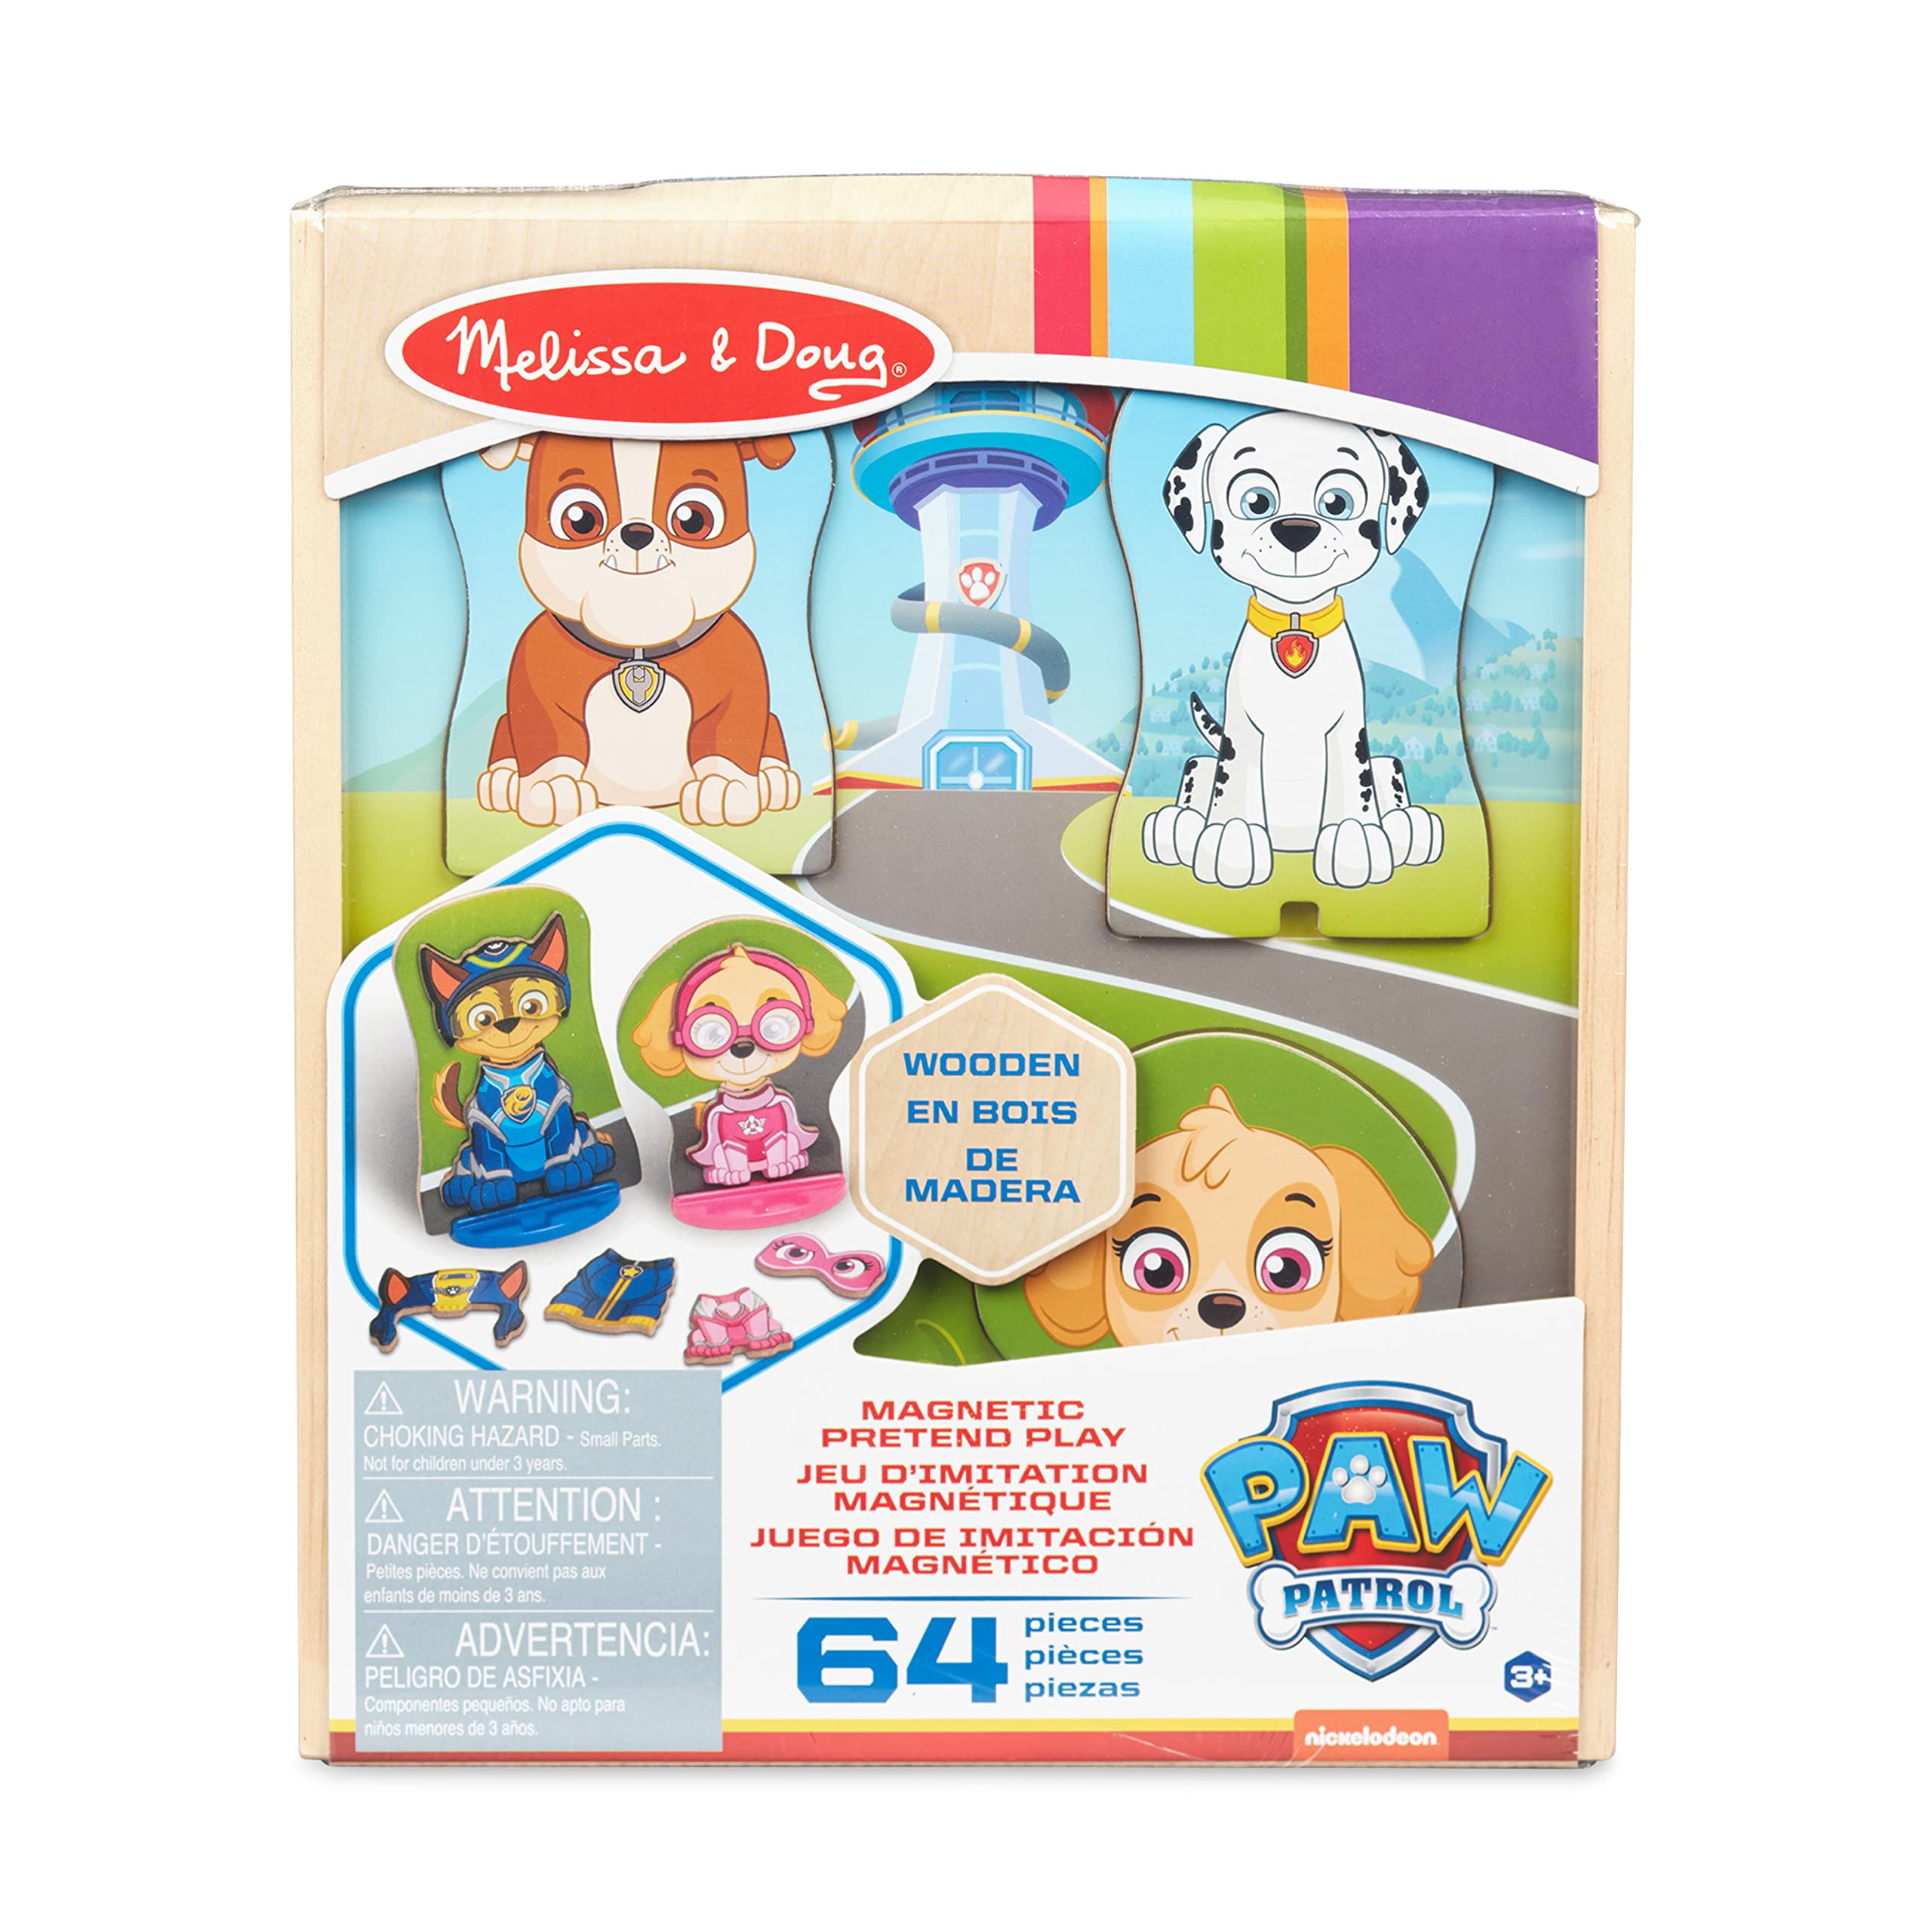 Melissa & Doug PAW Patrol Wooden Magnetic Pretend Play (64 Pieces), Multi color - Toys, Activity Set For Kids Ages 3+